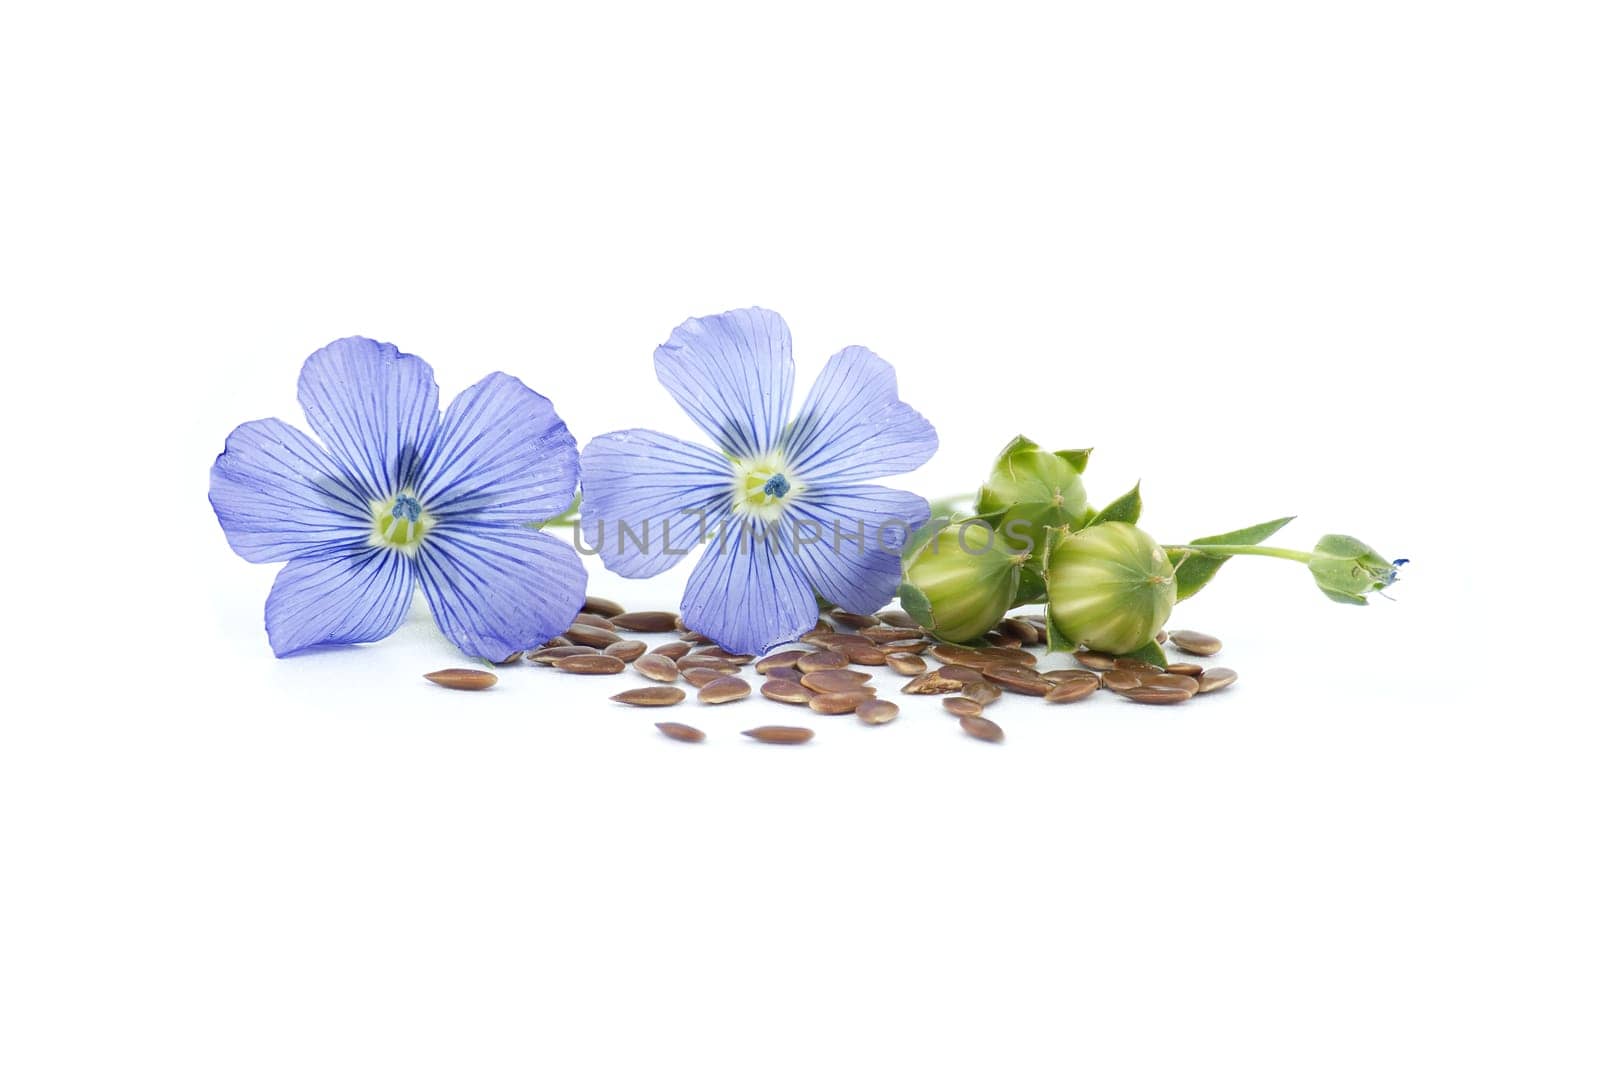 Blue flax blossom and seeds over white background by NetPix